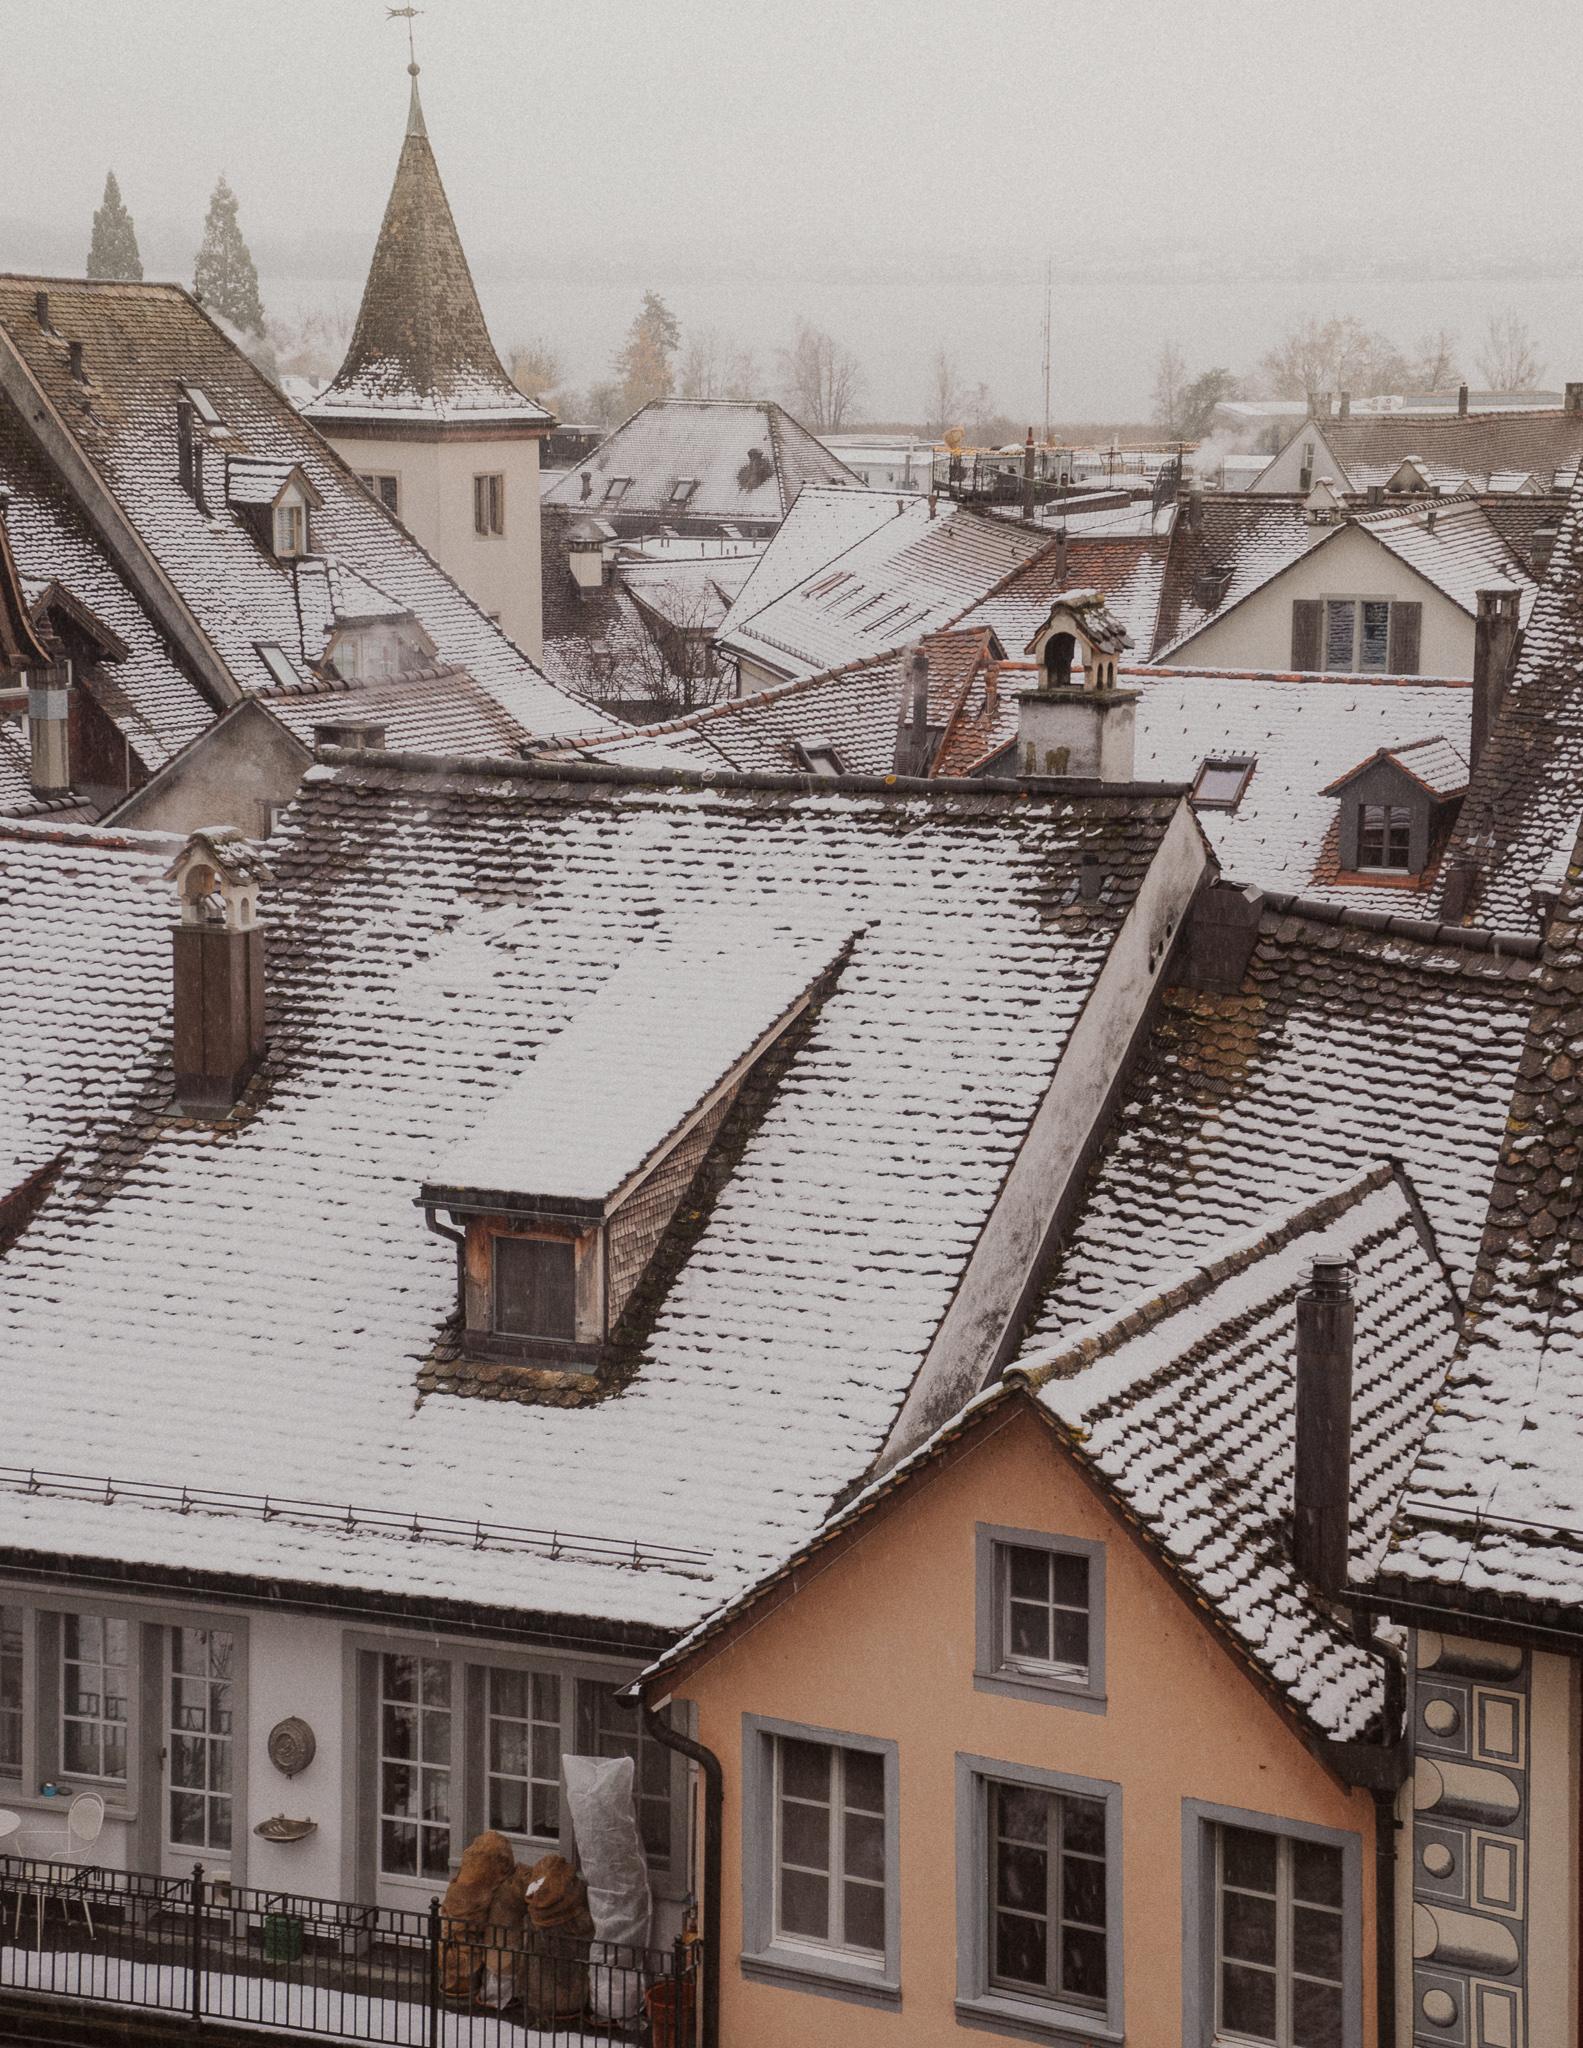 View of snow capped roofs in Rapperswil  from Rapperswil Castle Park on a foggy day.